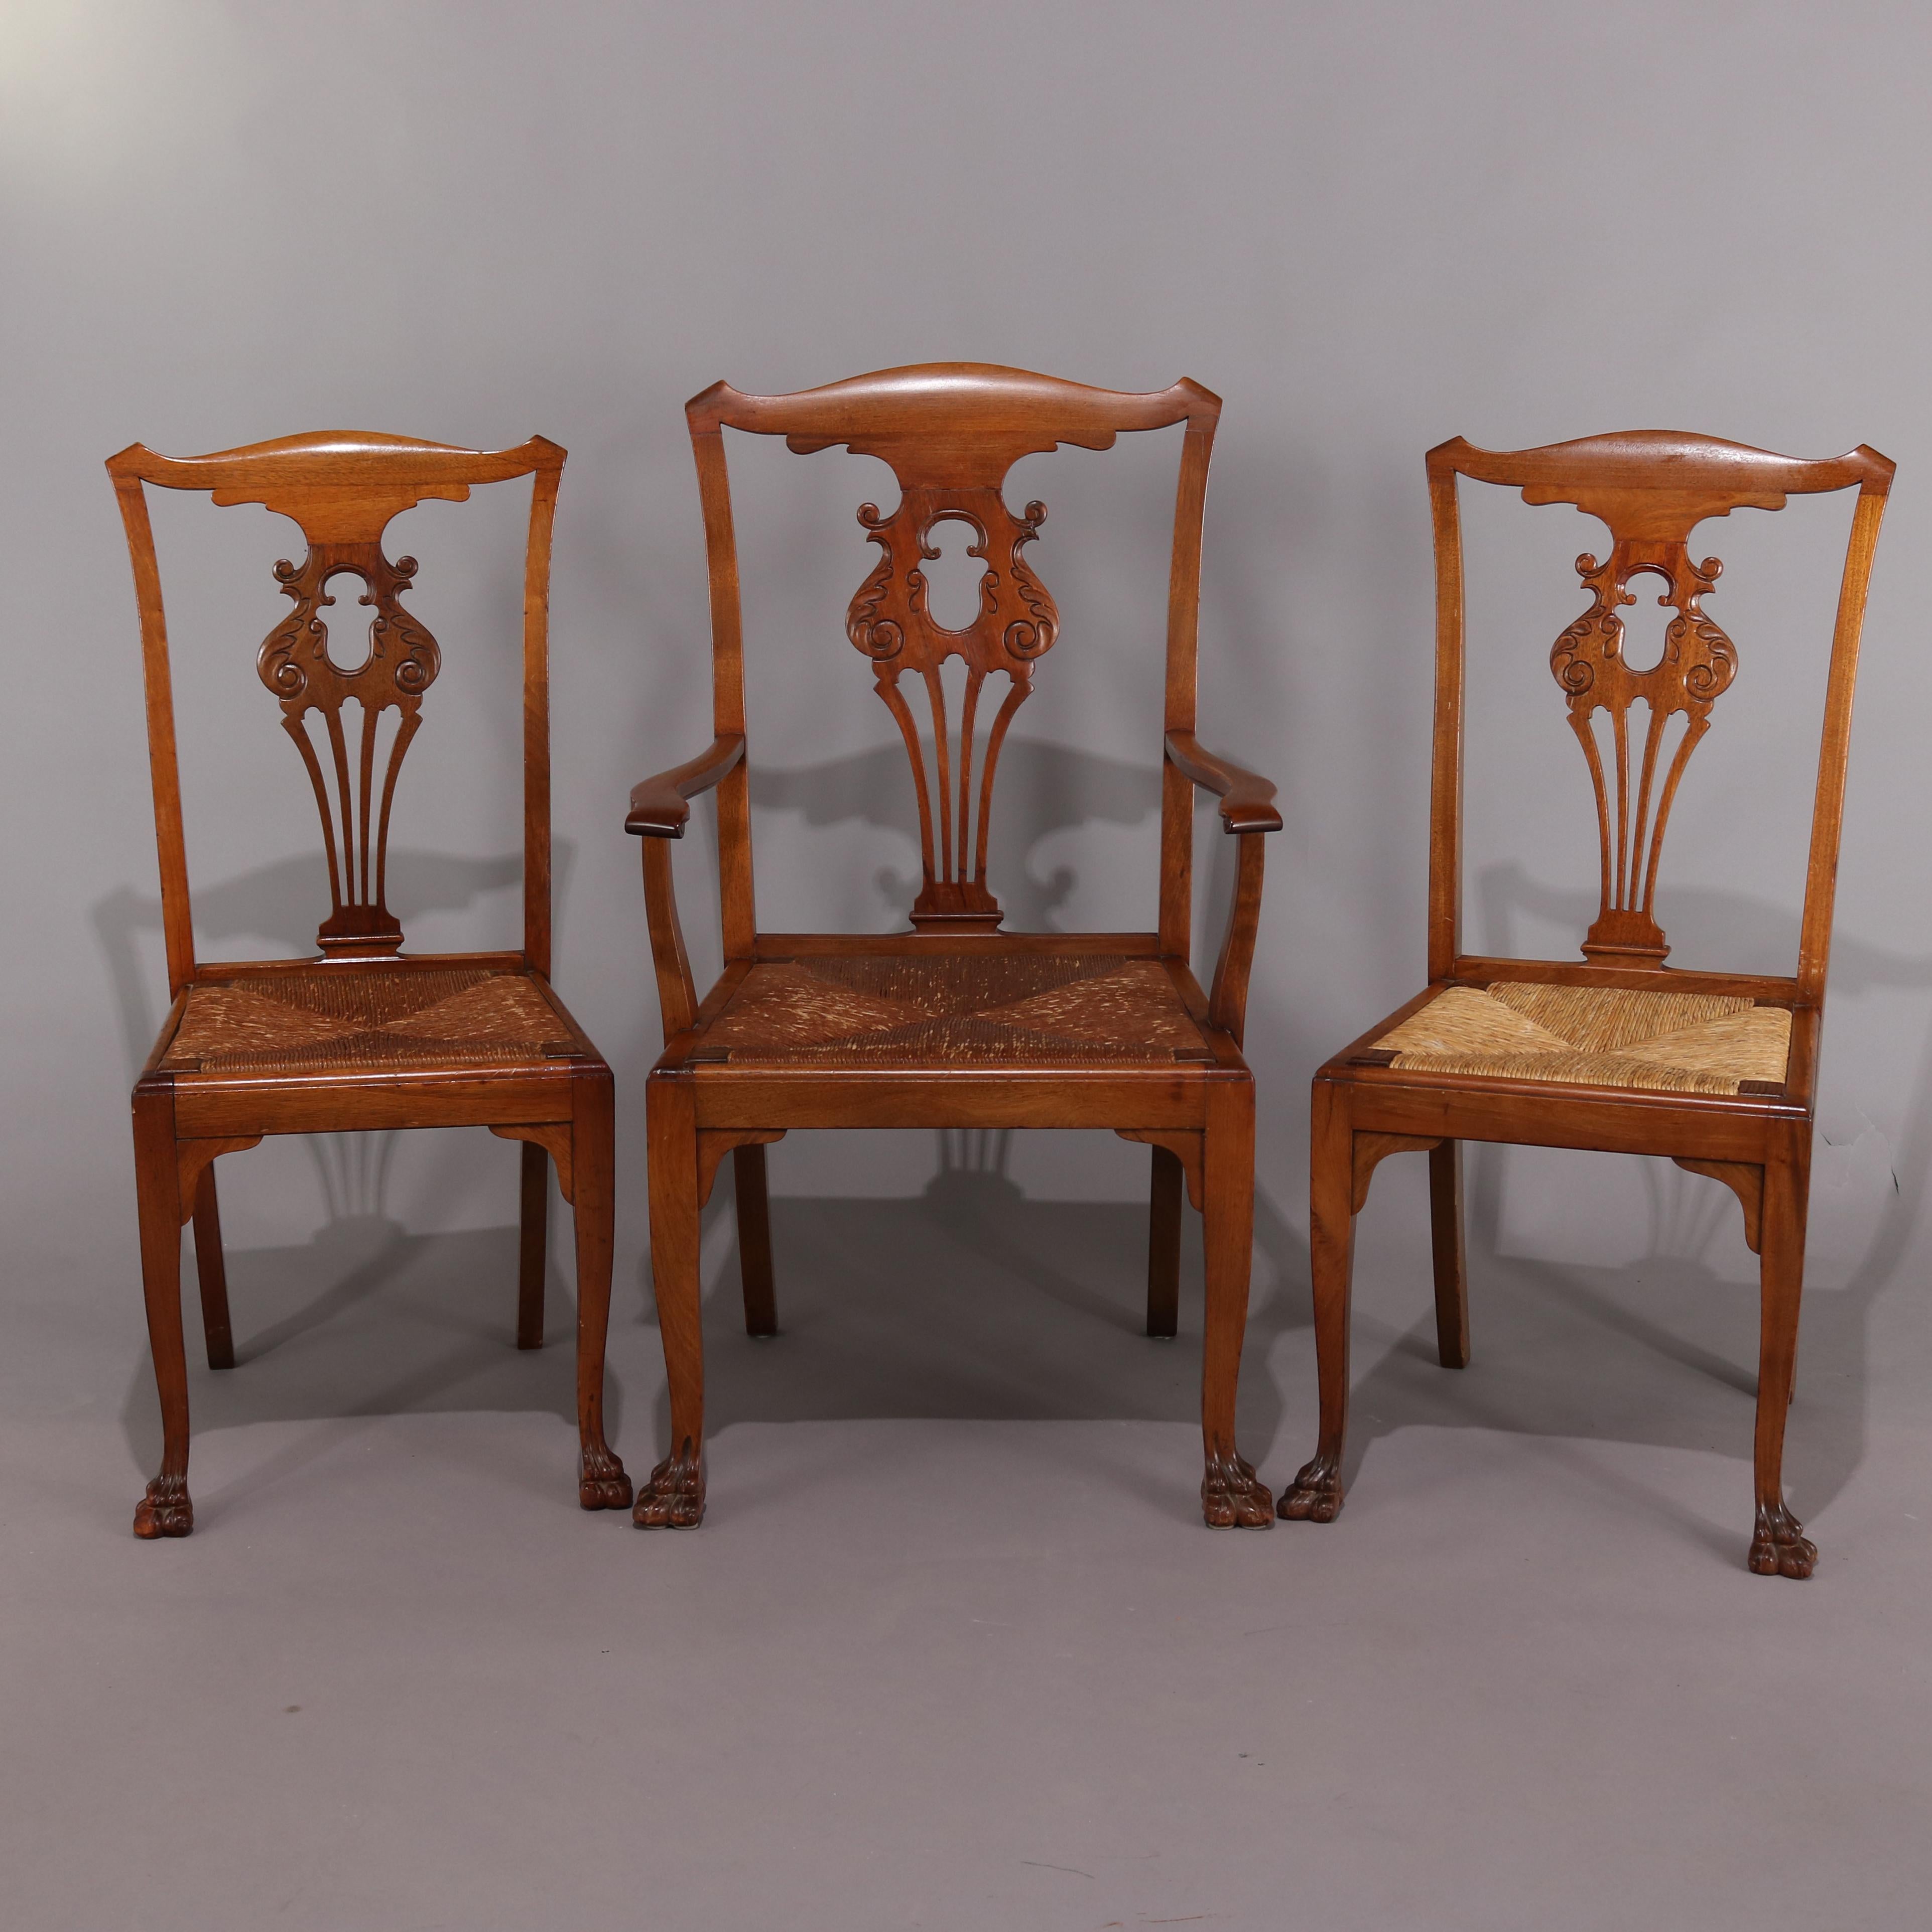 Set of 6 antique French Louis XIV style mahogany dining chairs feature pieced backs with foliate design, rush seats, and includes one arm chair and five side chairs, circa 1920

Measures: armchair 42.25